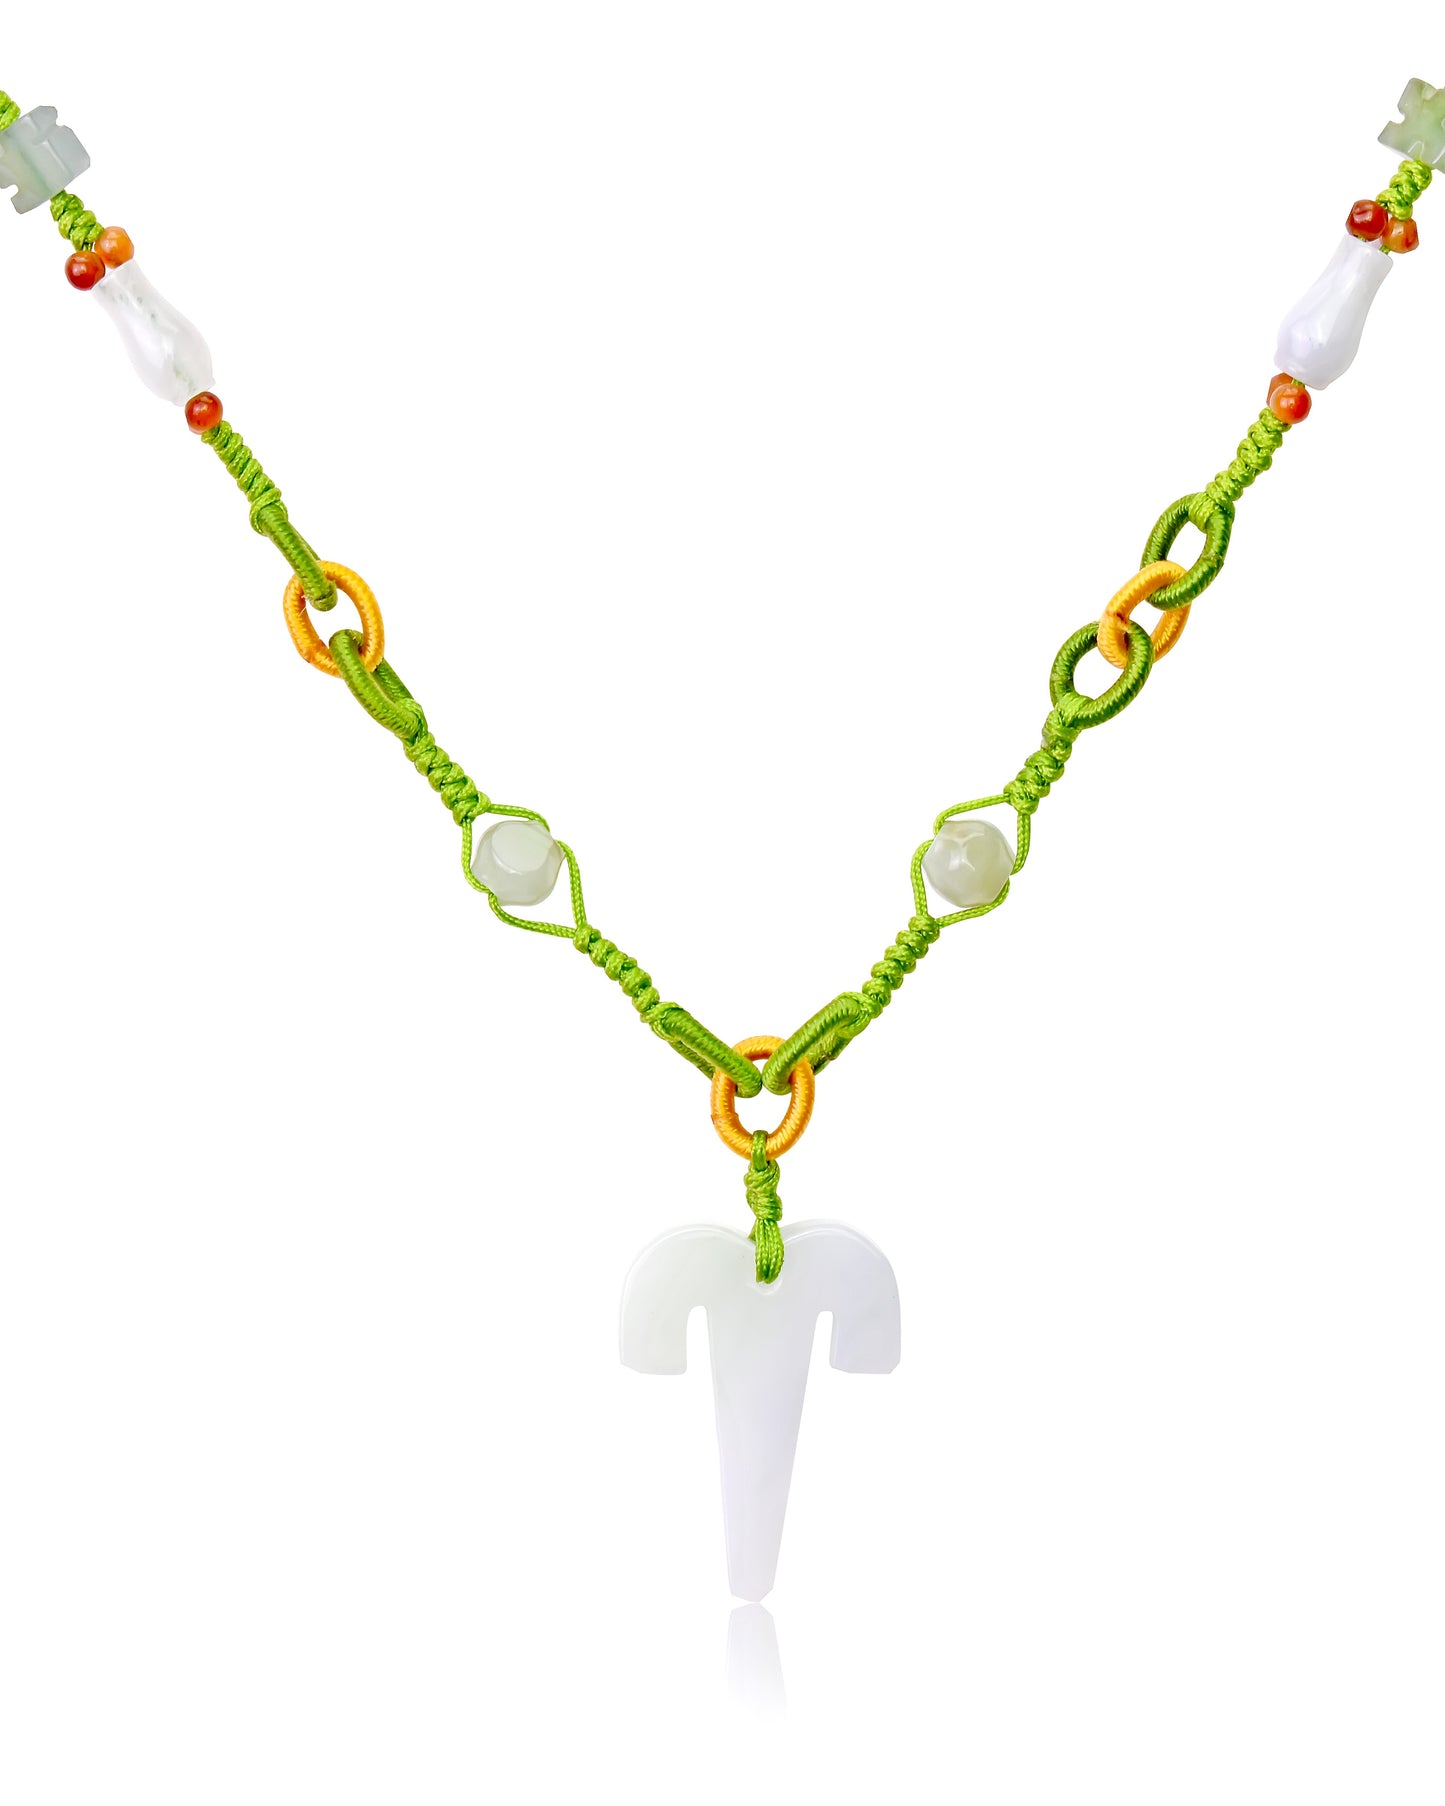 Aries Astrology Handmade Jade Necklace Single Pendant with Lime Cord